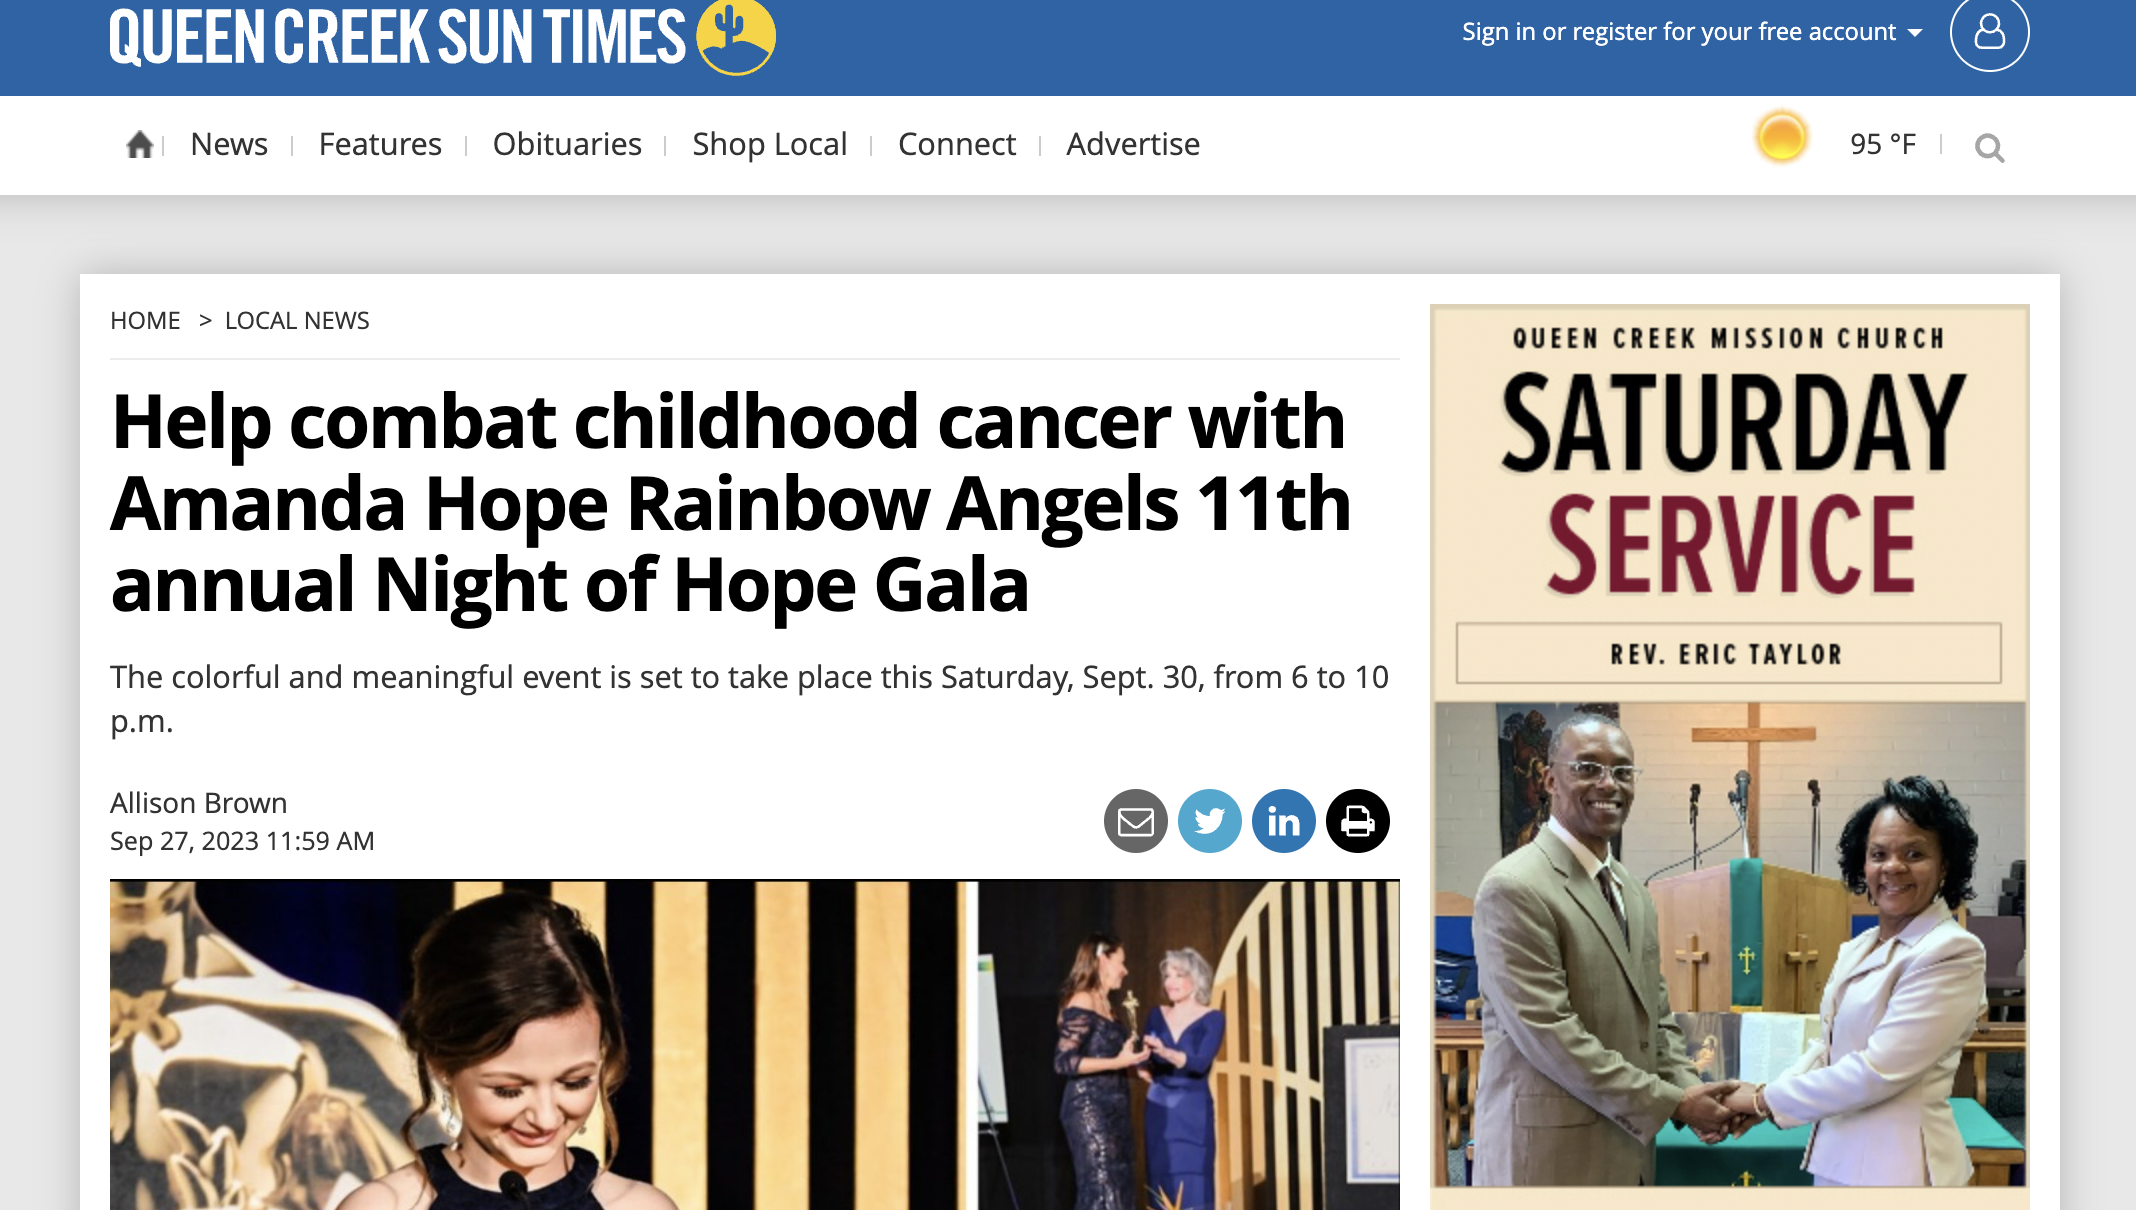 Queen Creek Sun Times: Help combat childhood cancer with Amanda Hope Rainbow Angels 11th annual Night of Hope Gala